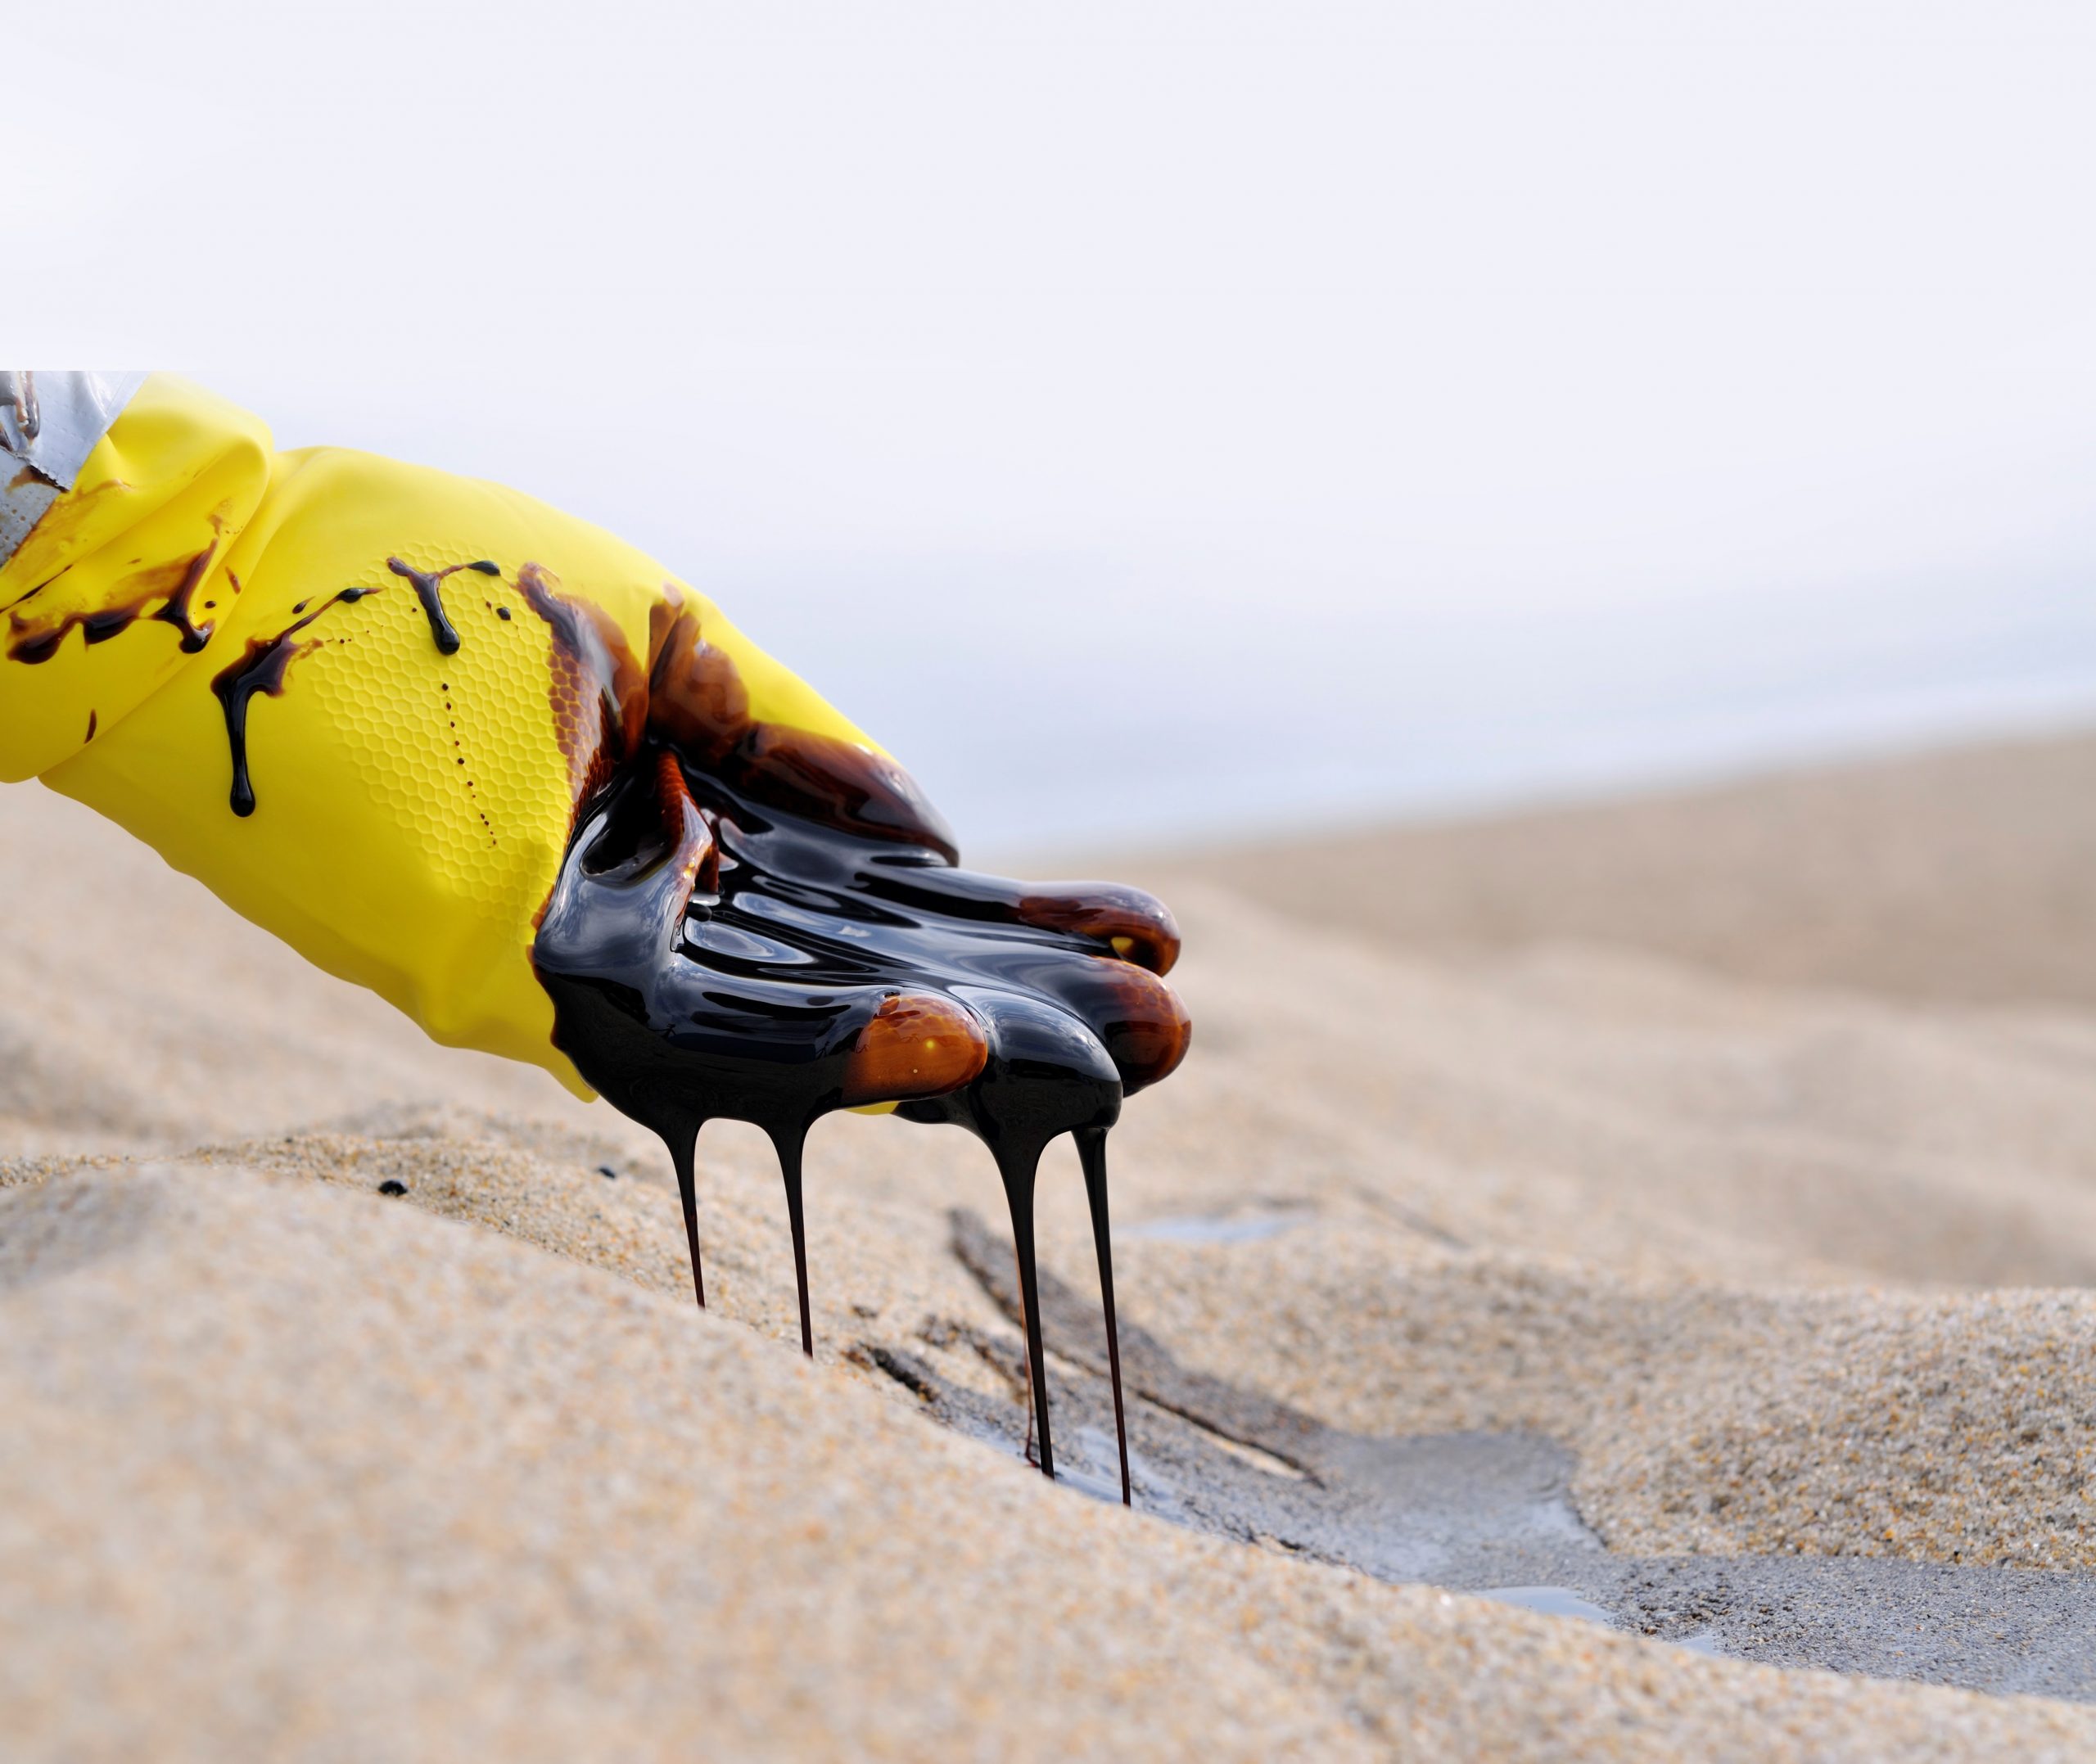 A yellow glove holding a handful of oil over sand